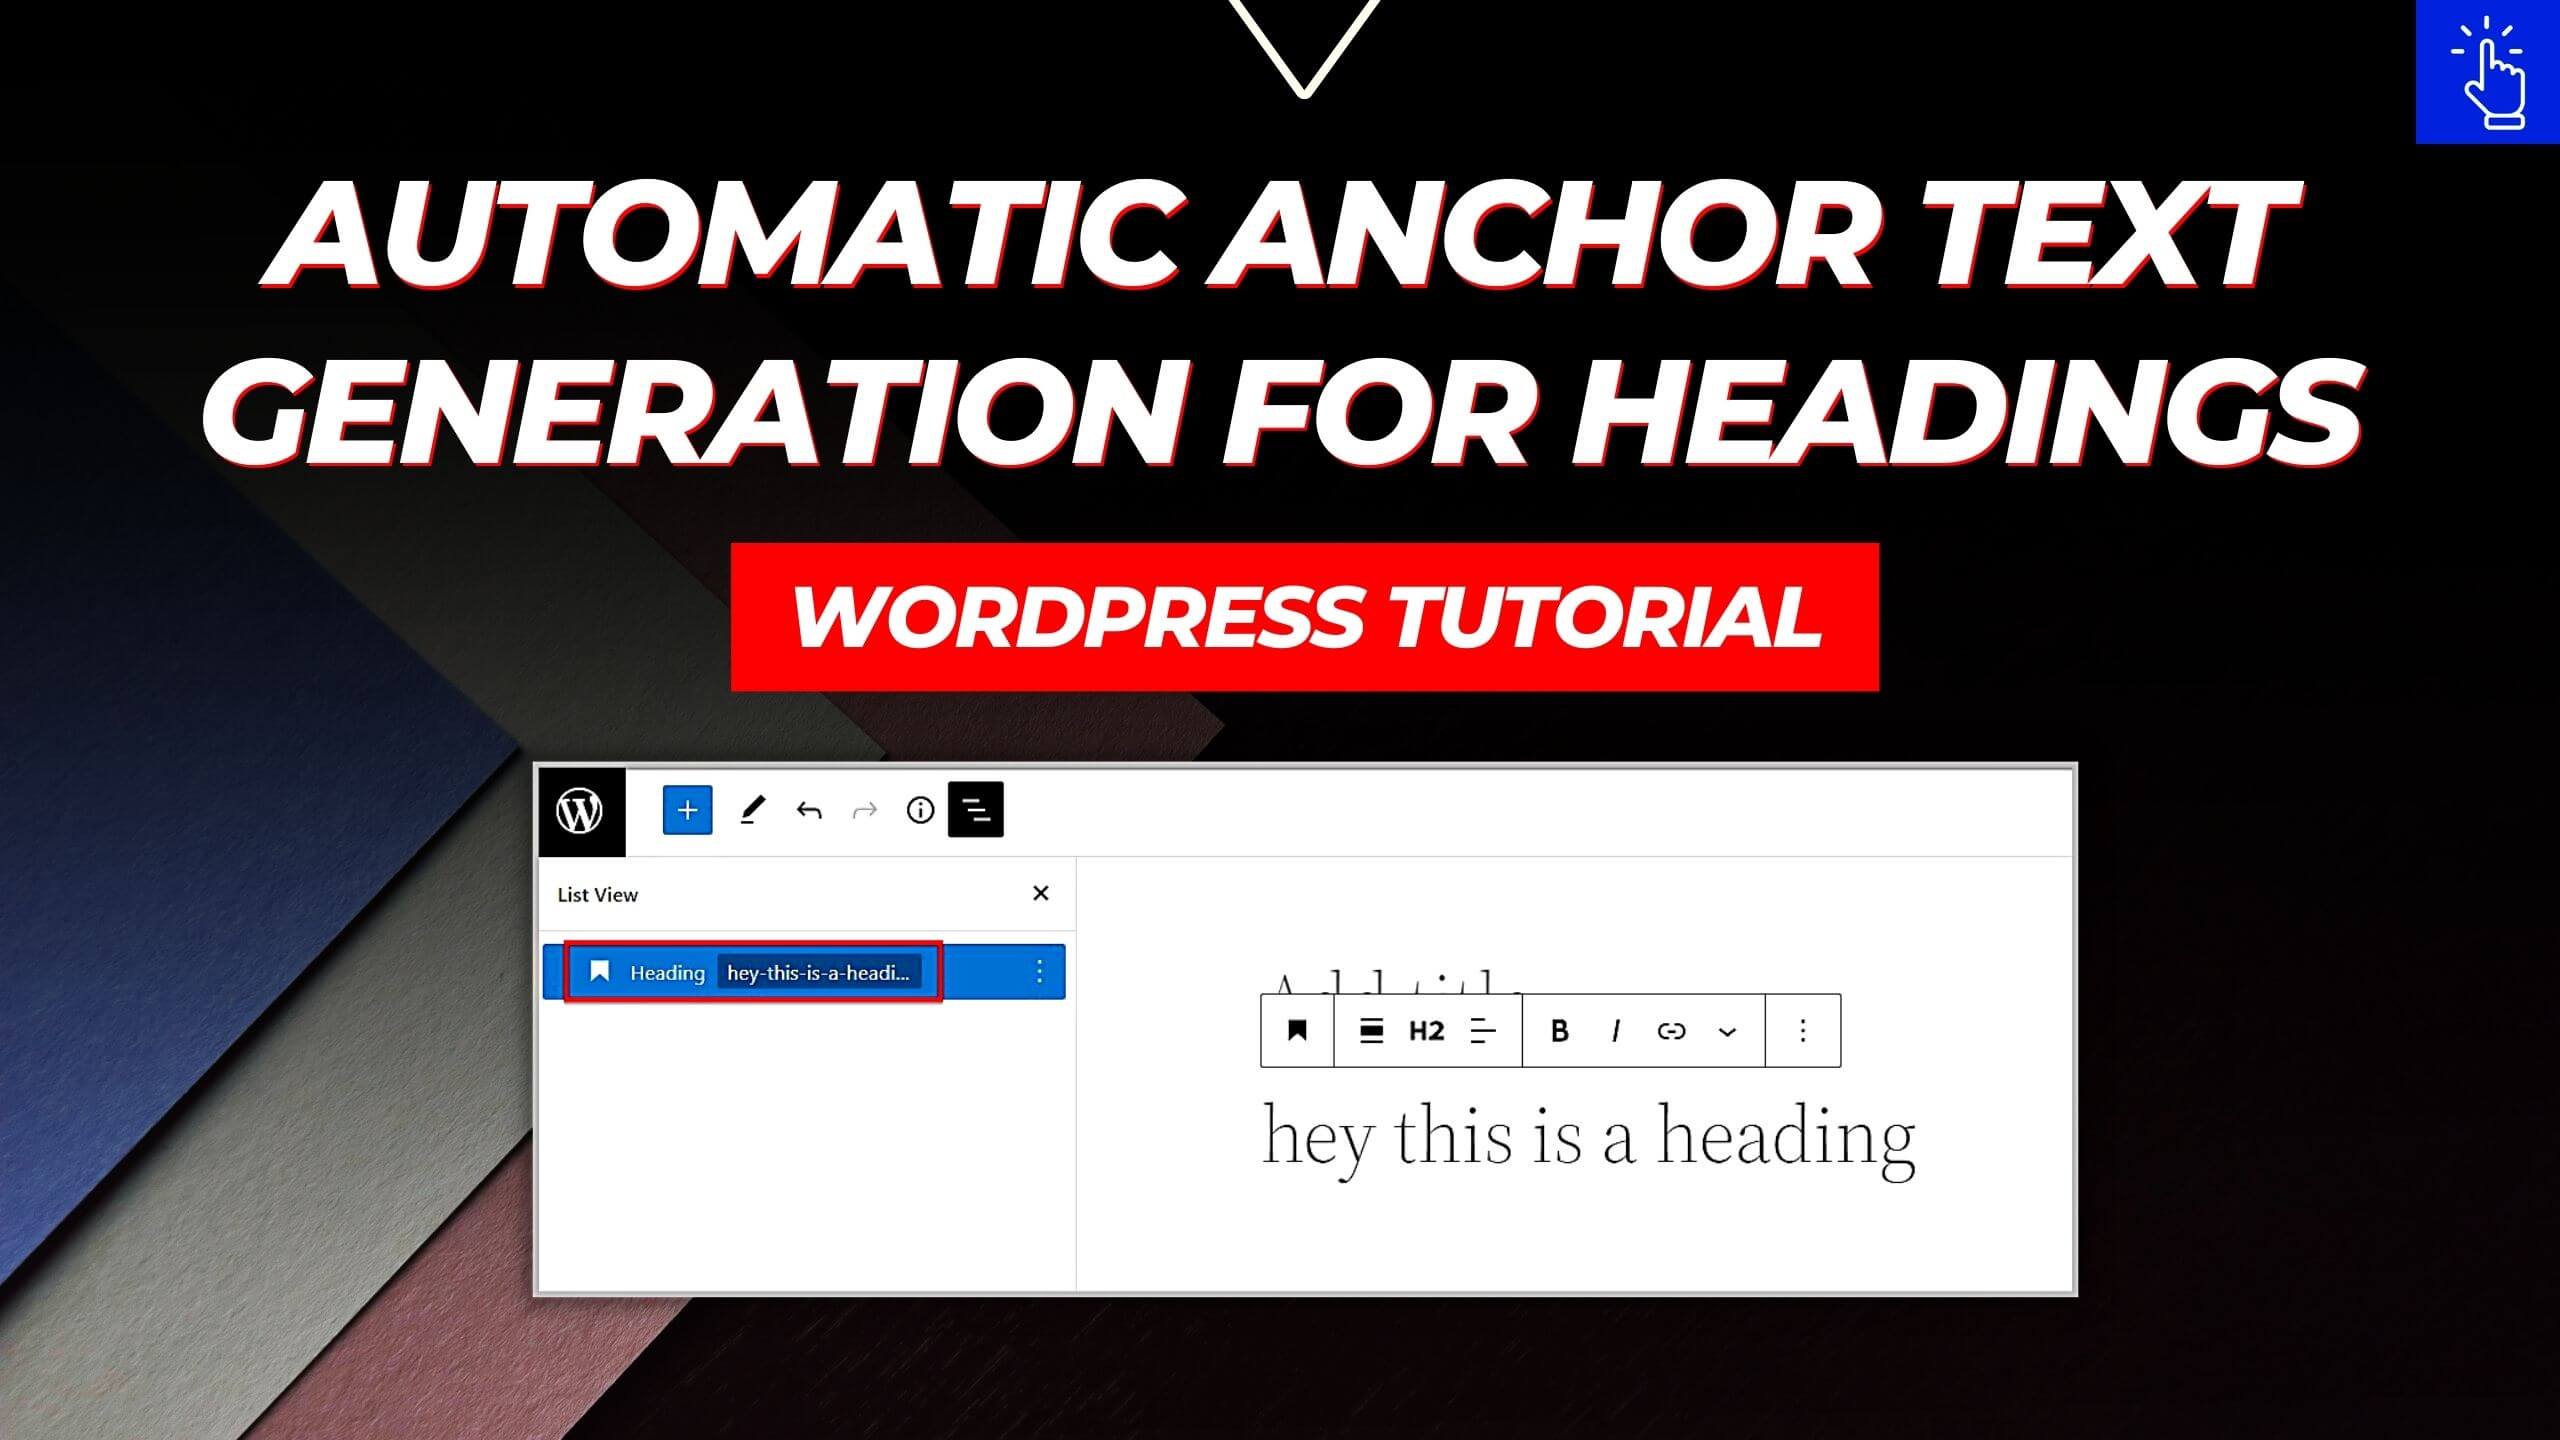 How to Enable Automatic Anchor Text Generation for Headings in WordPress